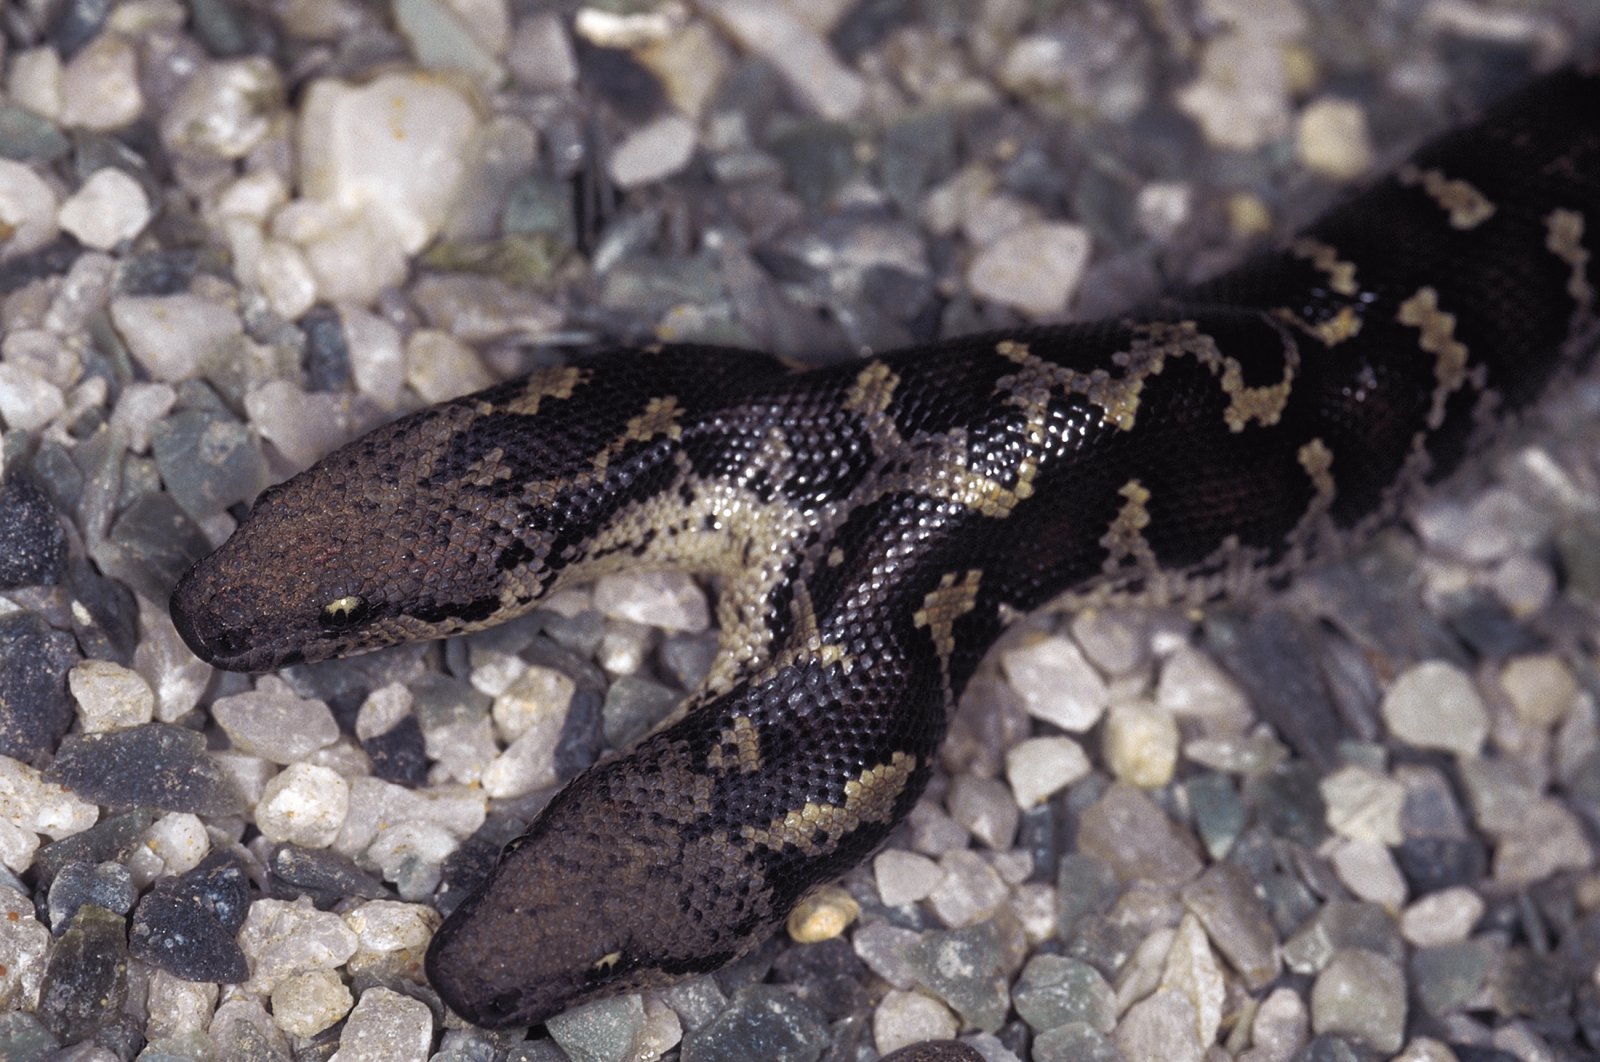 Two-headed Russell's Earth boa/Sand boa Bicephalous Eryx Conicus in Maharashtra, India in this undated file photo. (Shutterstock File Photo)